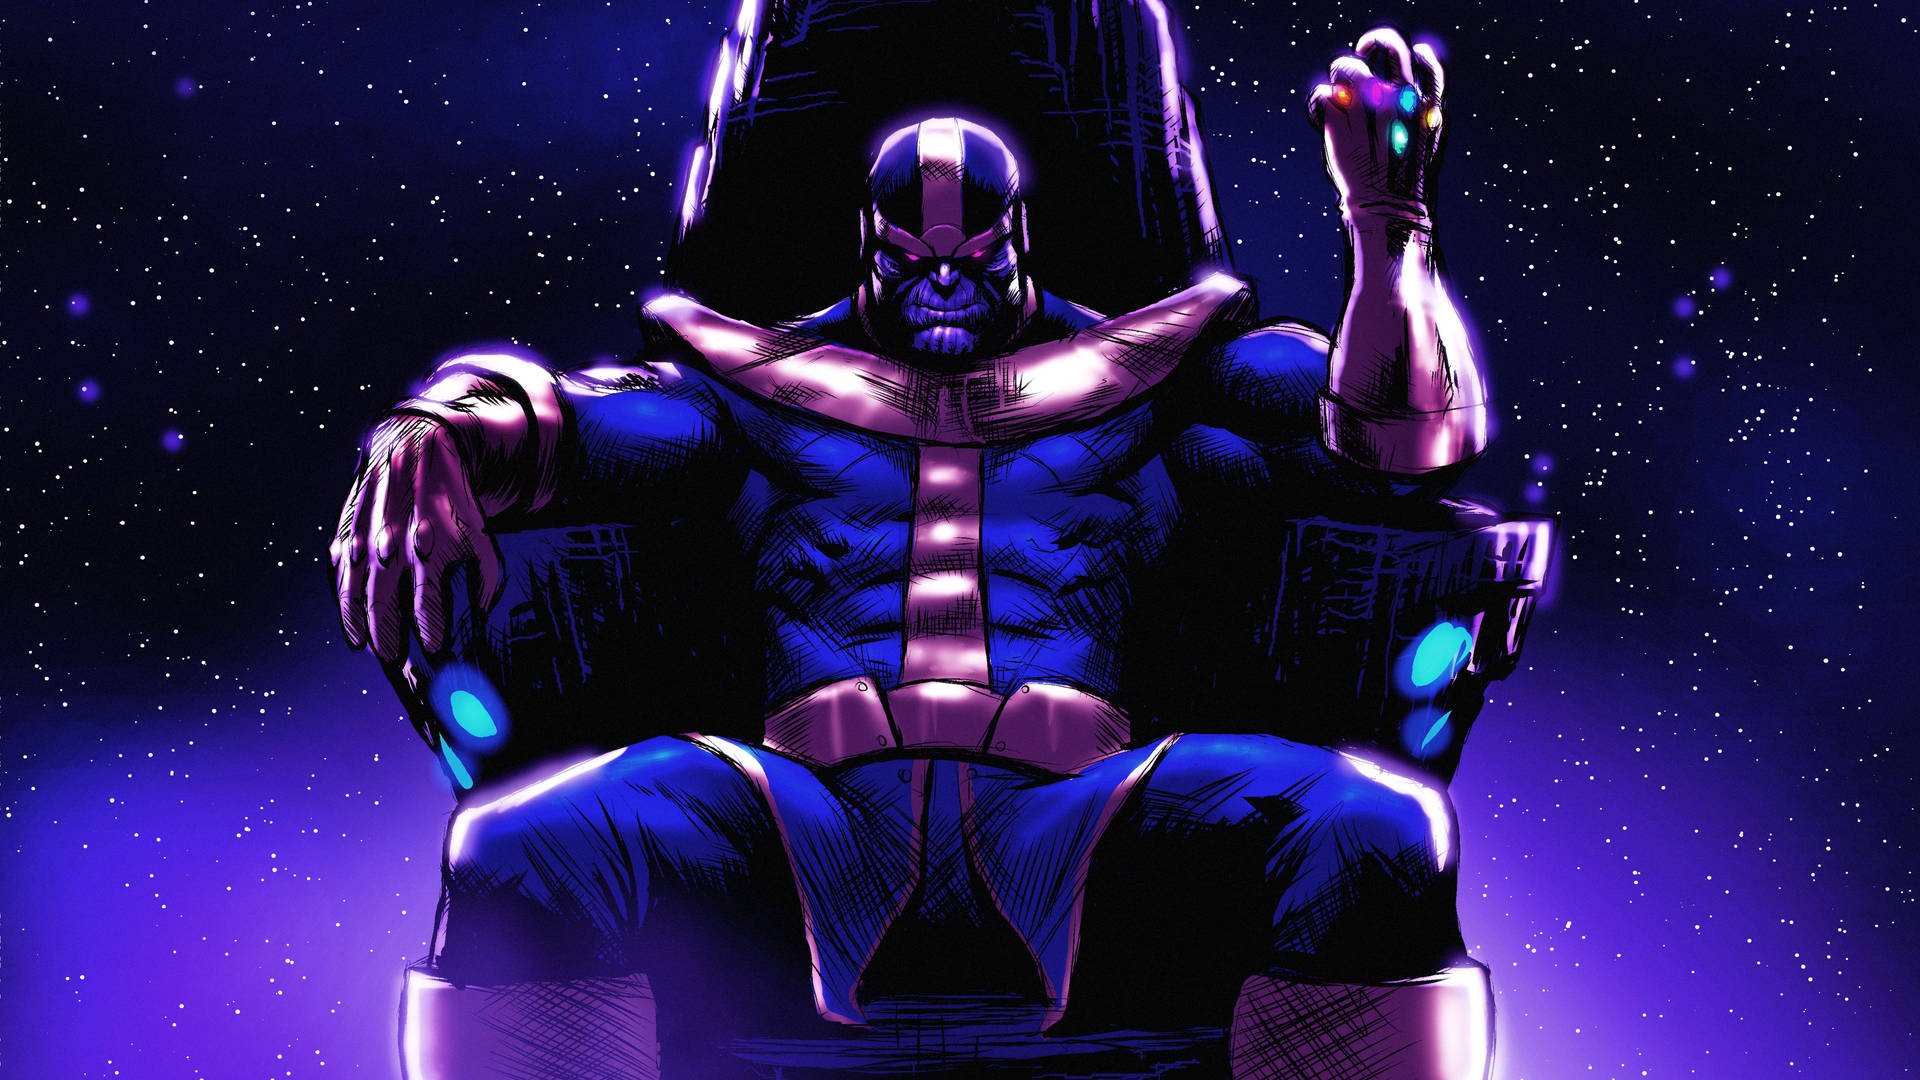 Thanos hd wallpapers hd images backgrounds